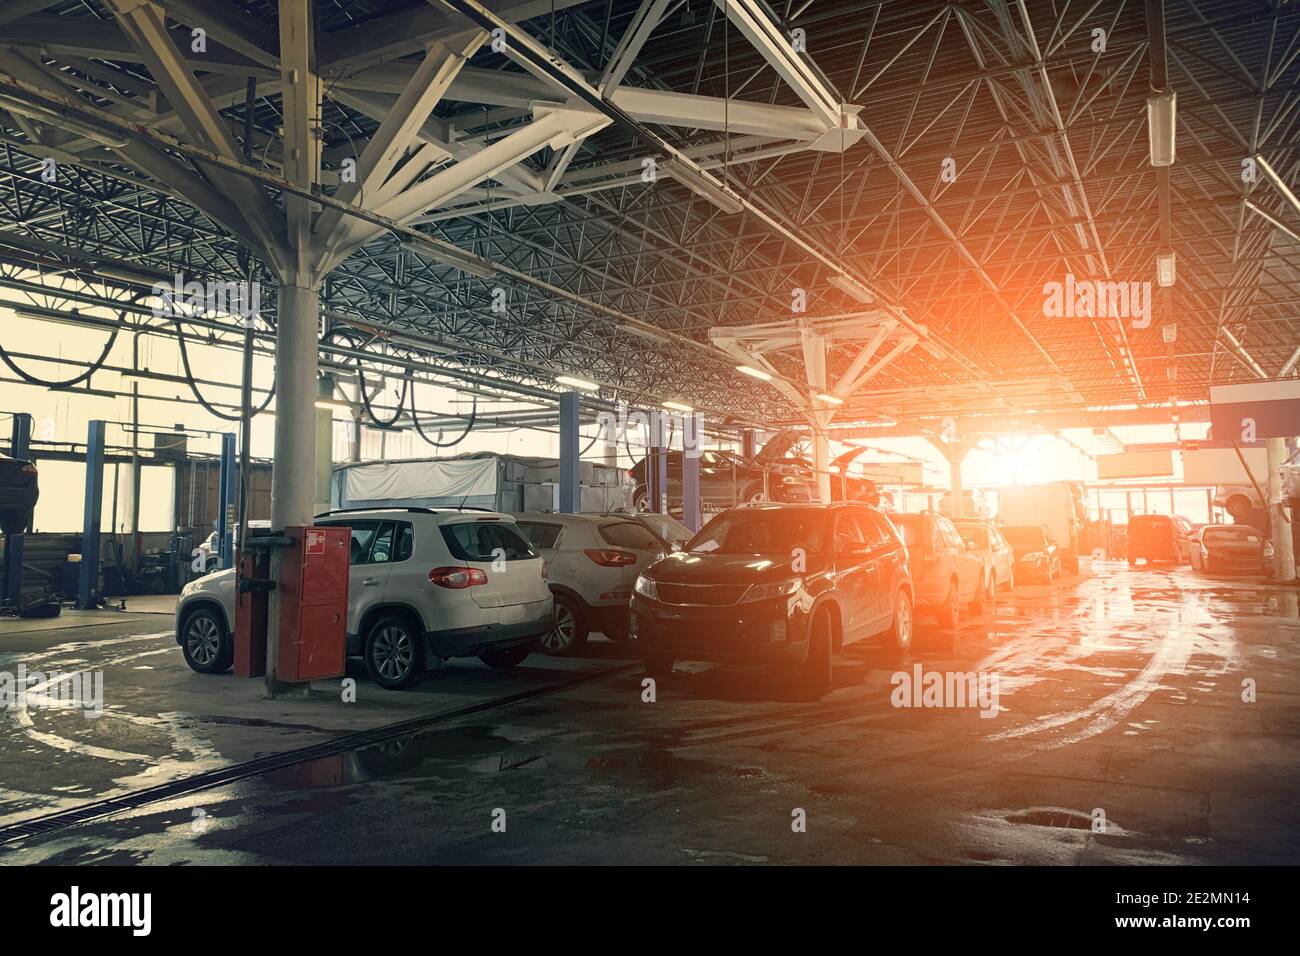 Autoservice garage center or car repair service shop with many cars for diagnostic and maintenance. Stock Photo